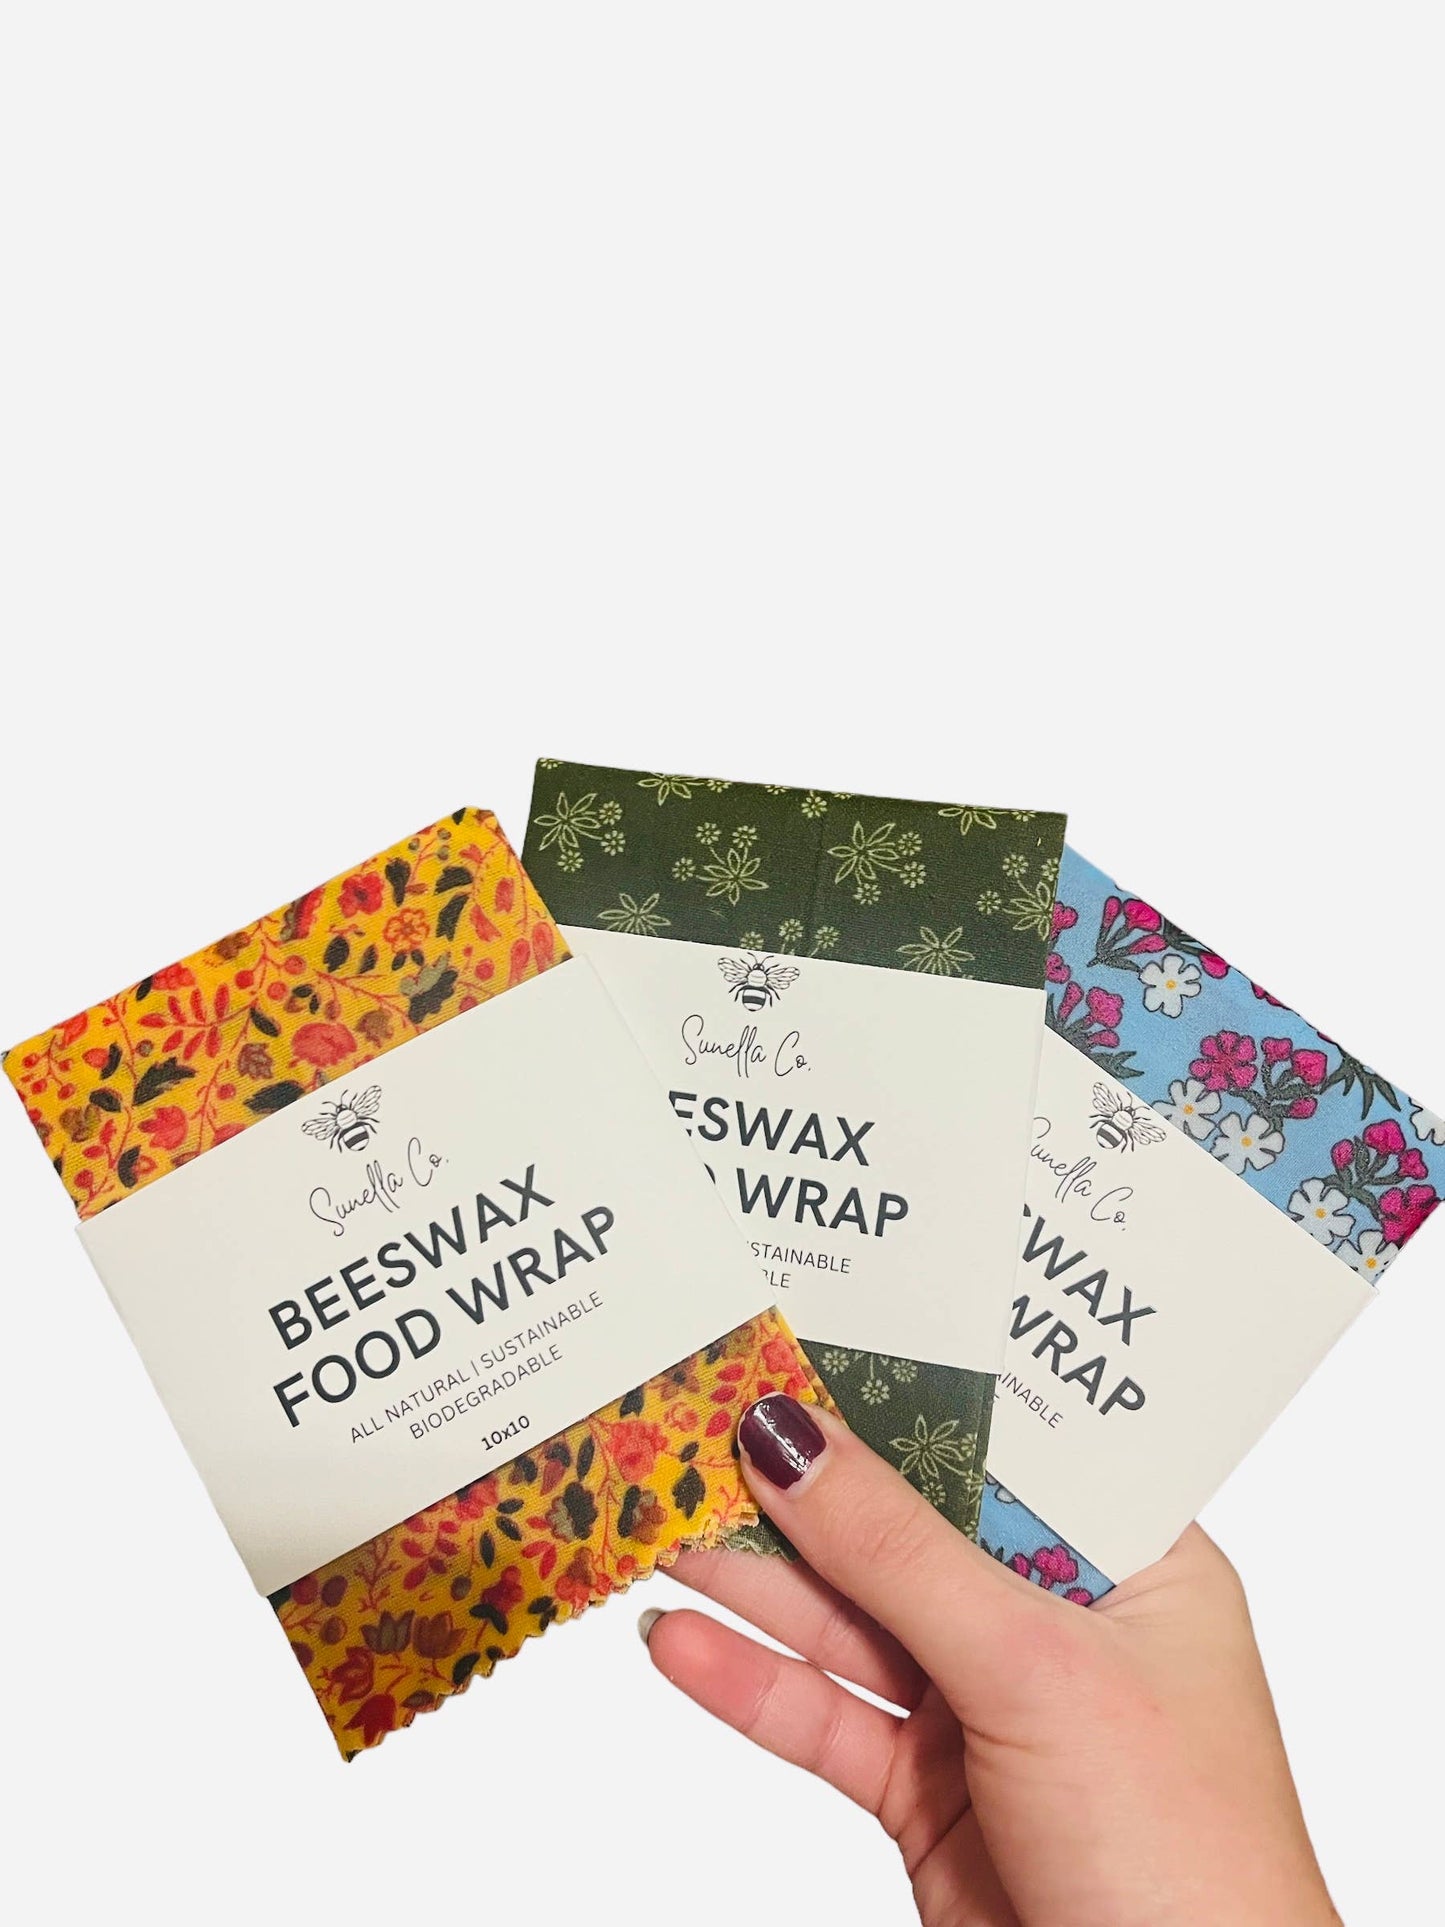 Beeswax Wraps - 3-pack - Ecofriendly Reusable Food Cover